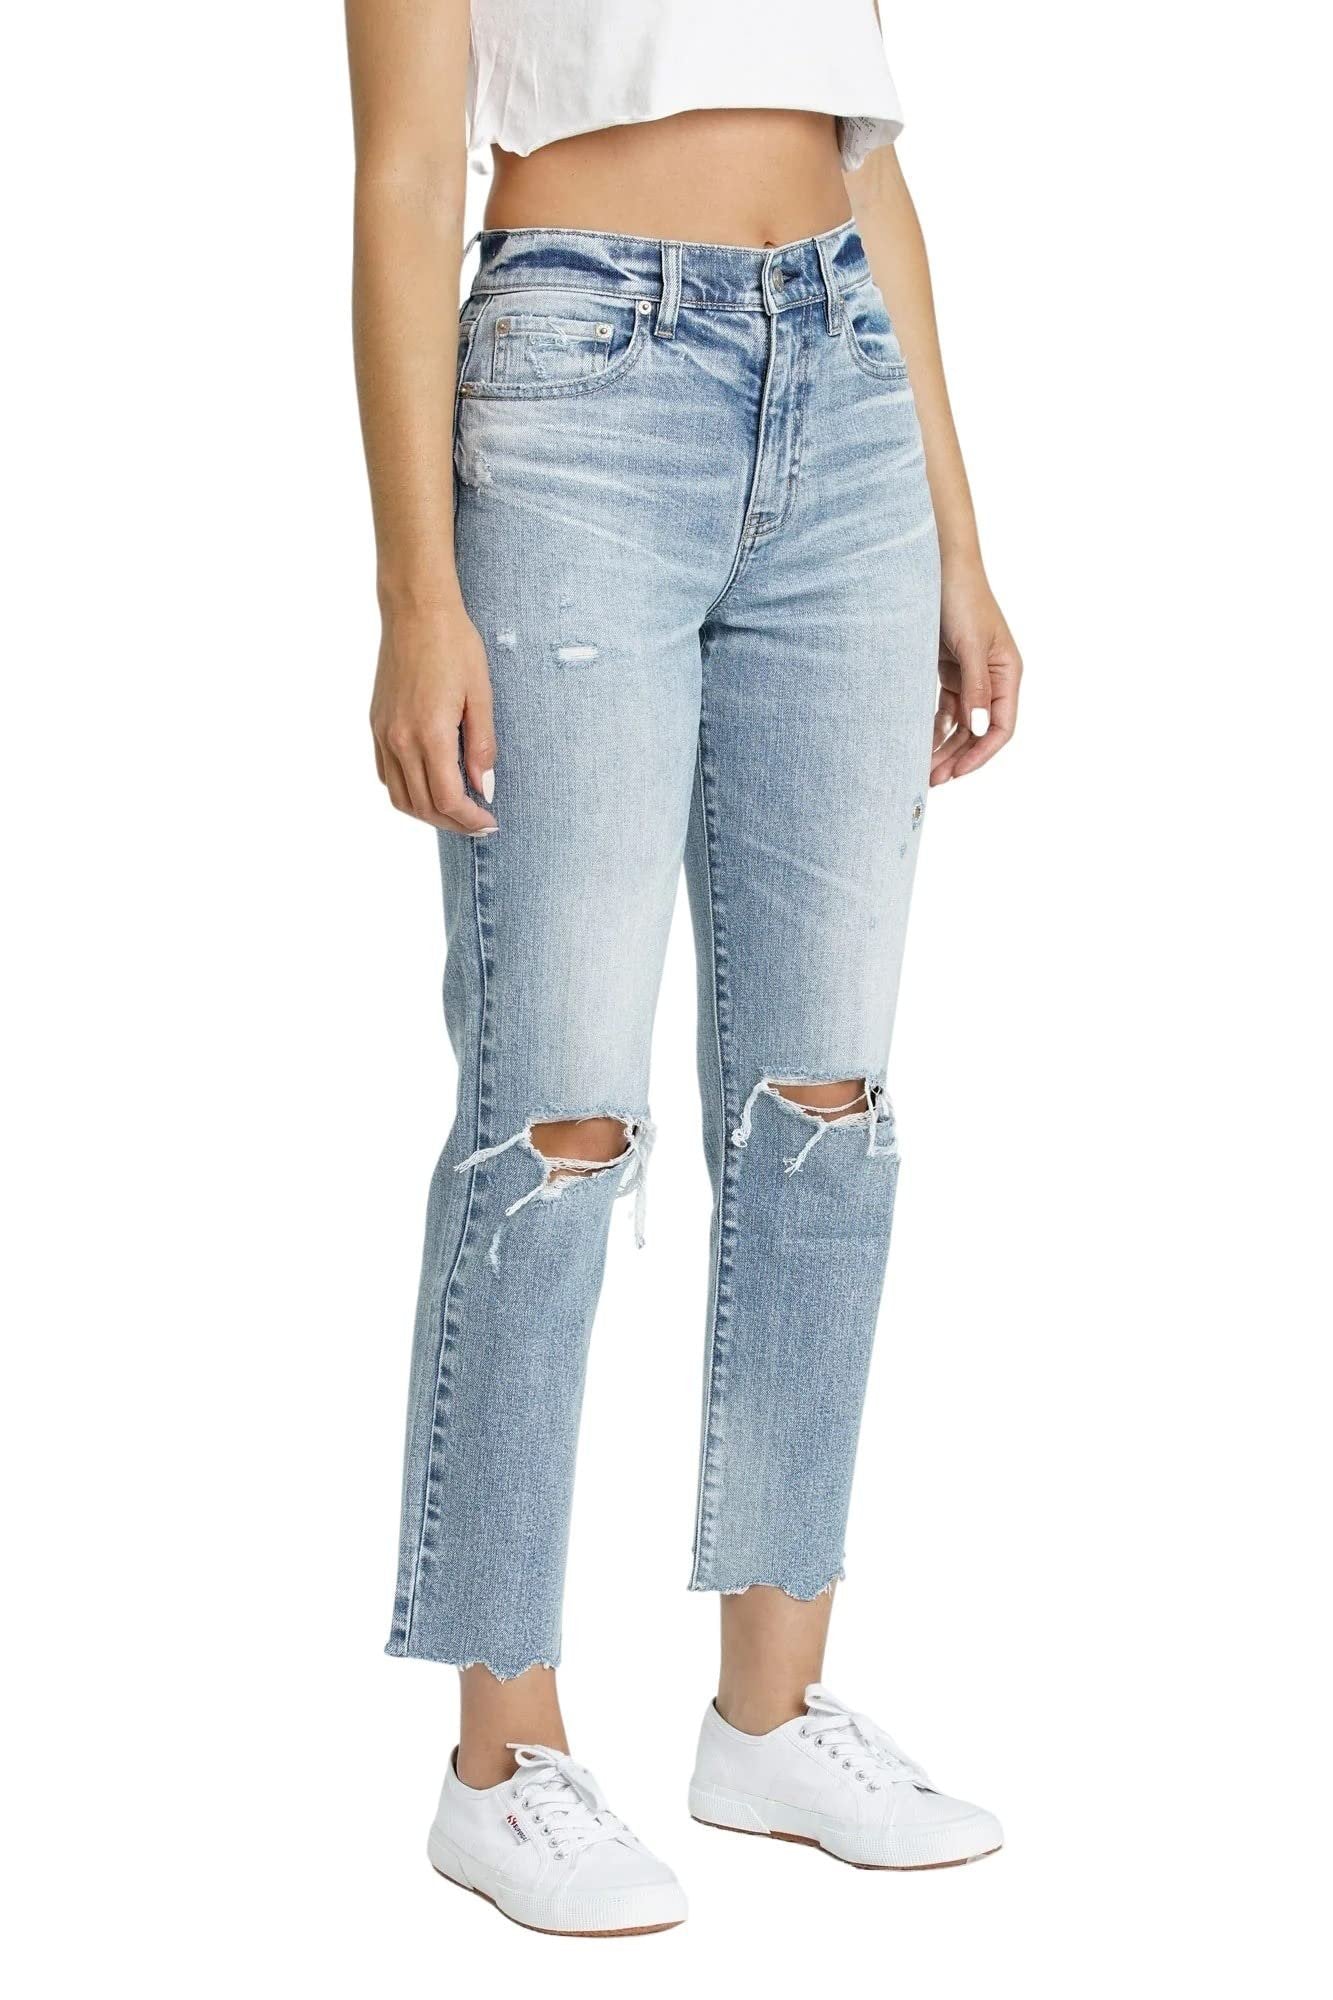 DAZE Straight Up High Rise Straight Denim Jeans in Lost Girls - Side